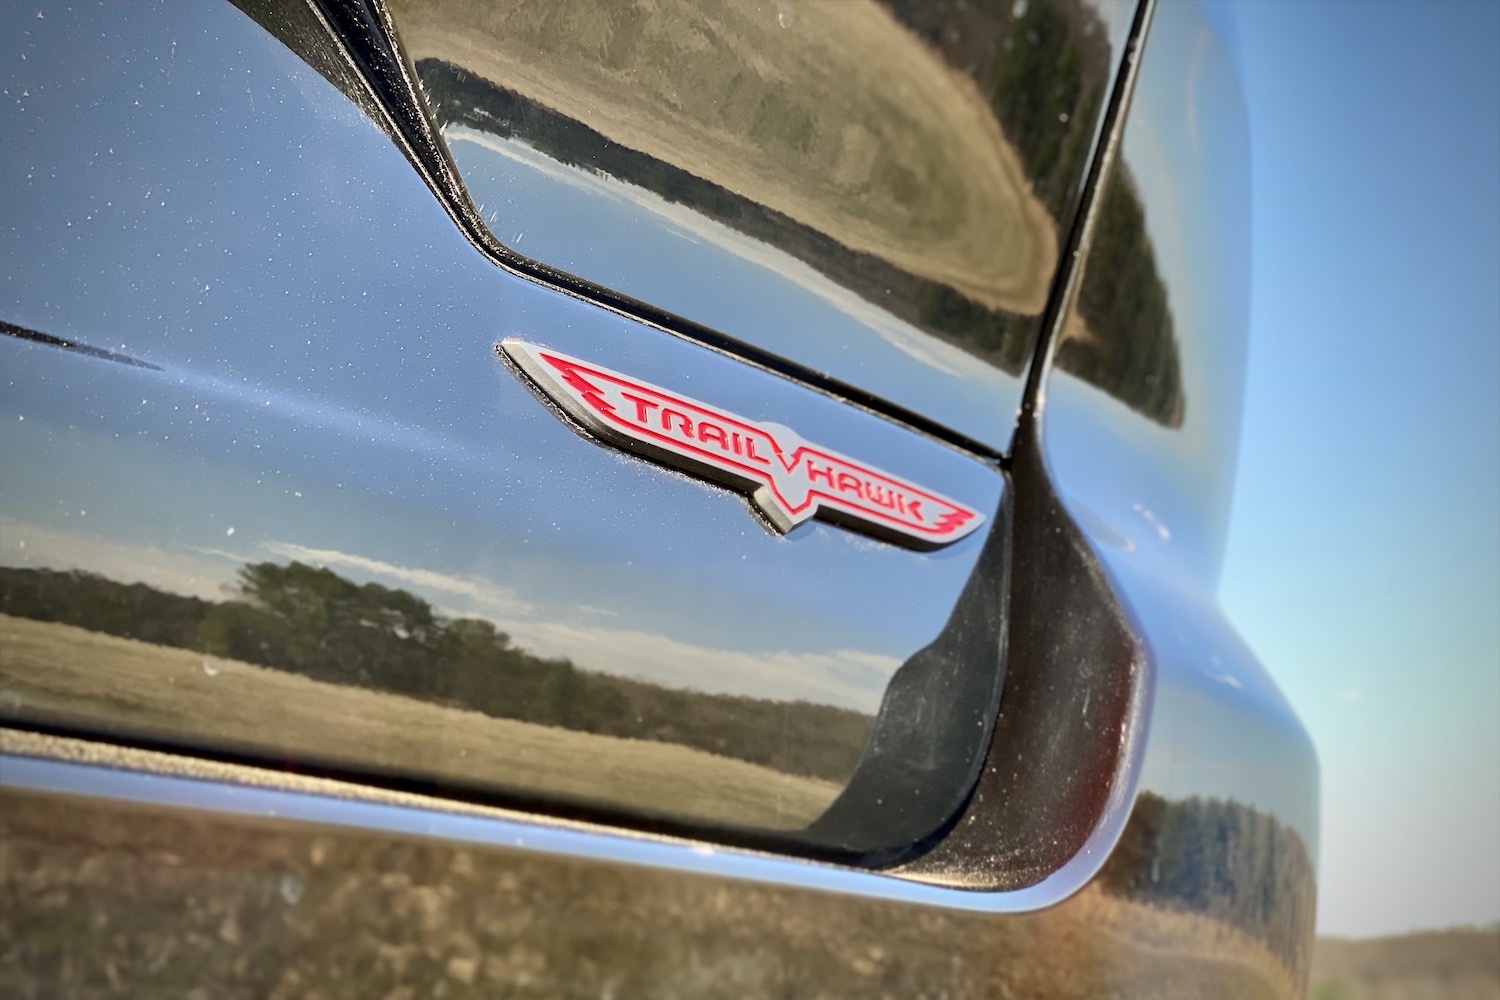 Trailhawk badge on the 2022 Jeep Grand Cherokee Trailhawk on the liftgate.